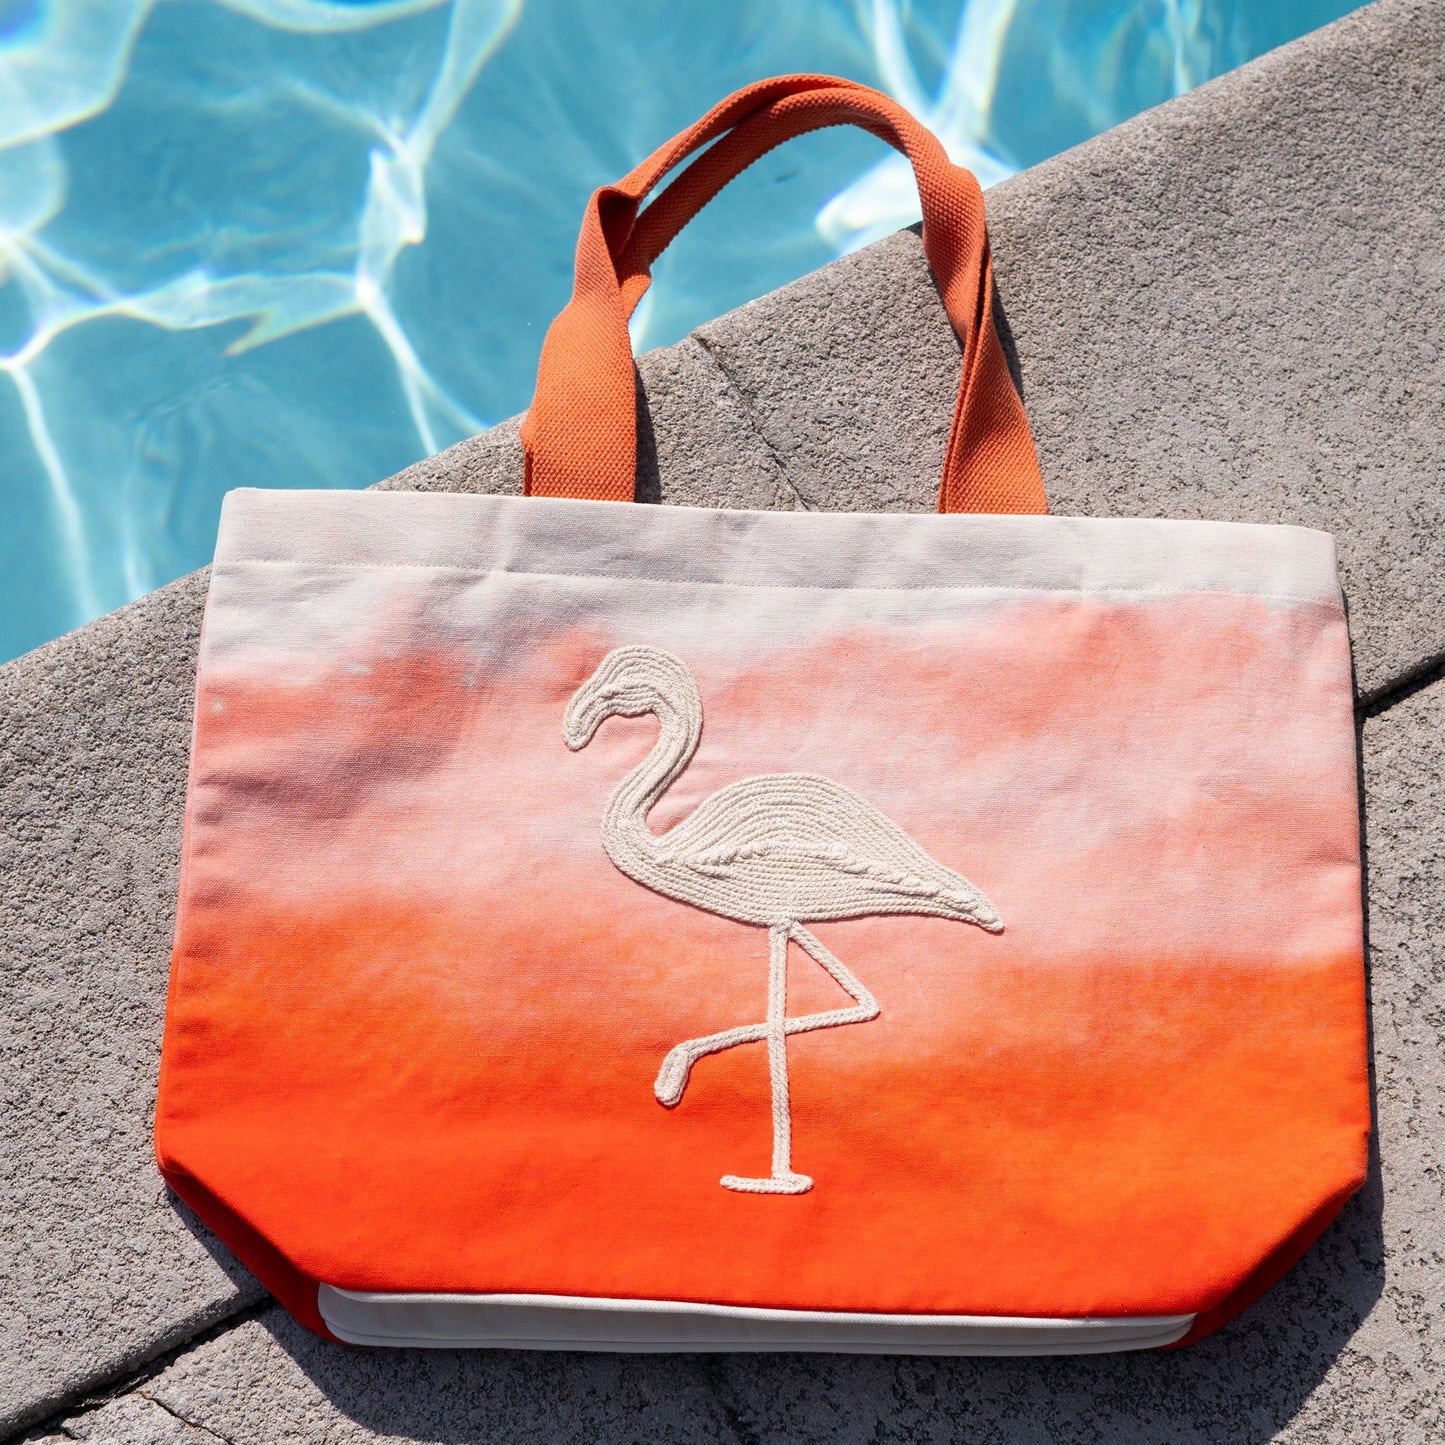 Maui Water Resistant Hand Embroidered Beach Tote Bag